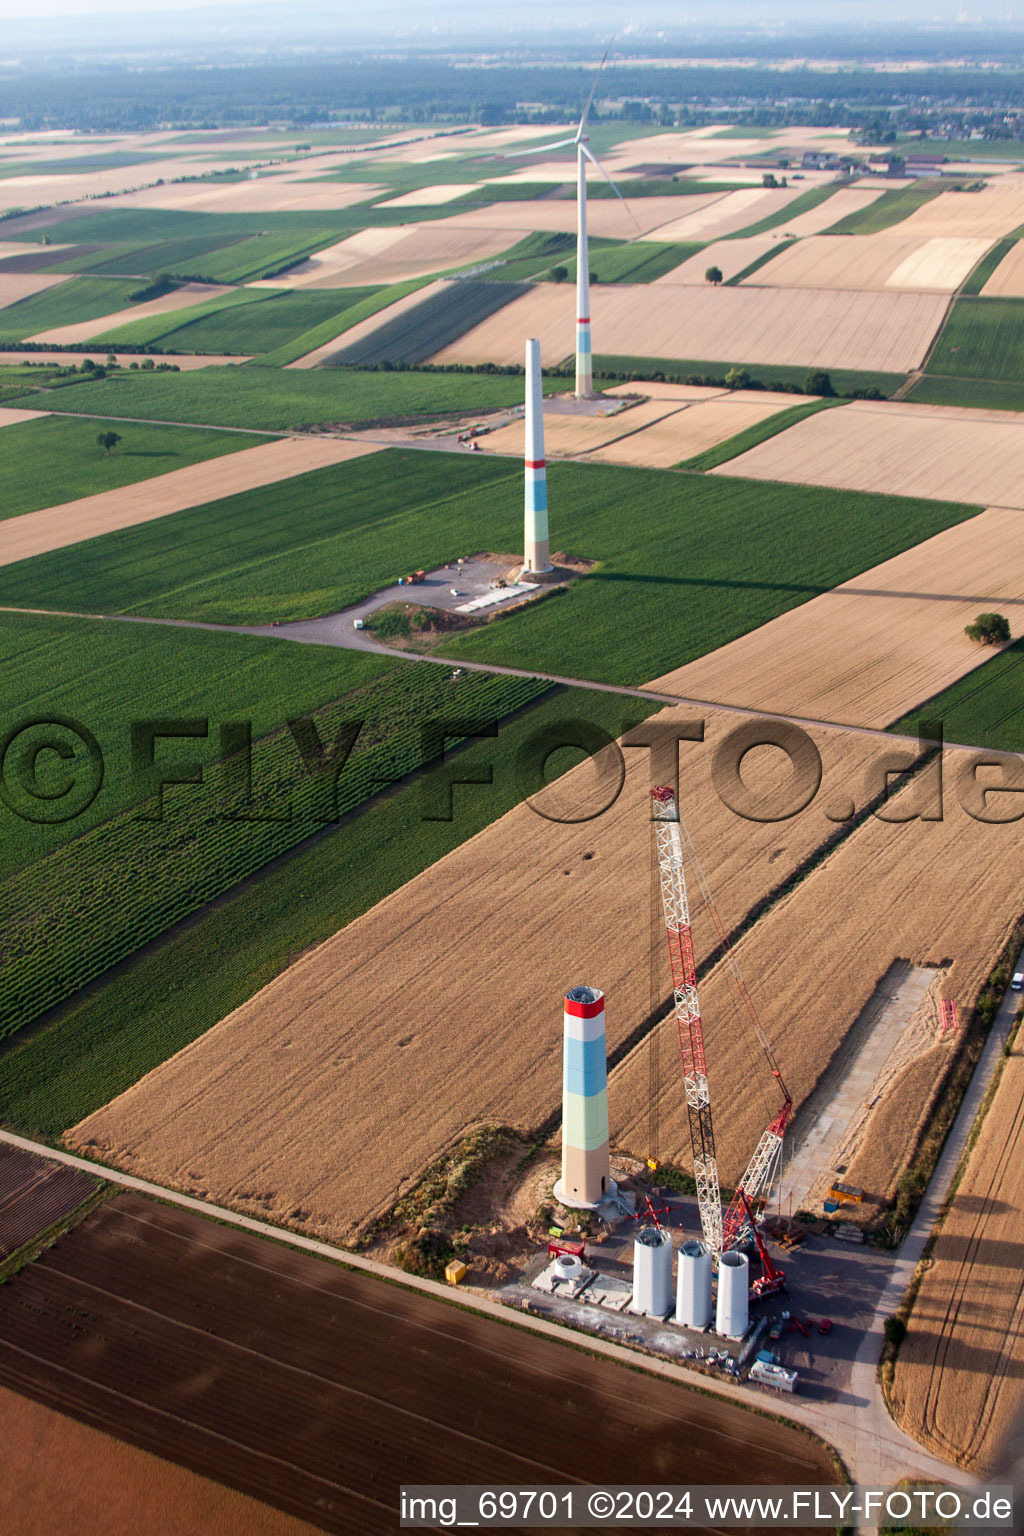 Wind farm construction in Offenbach an der Queich in the state Rhineland-Palatinate, Germany from a drone